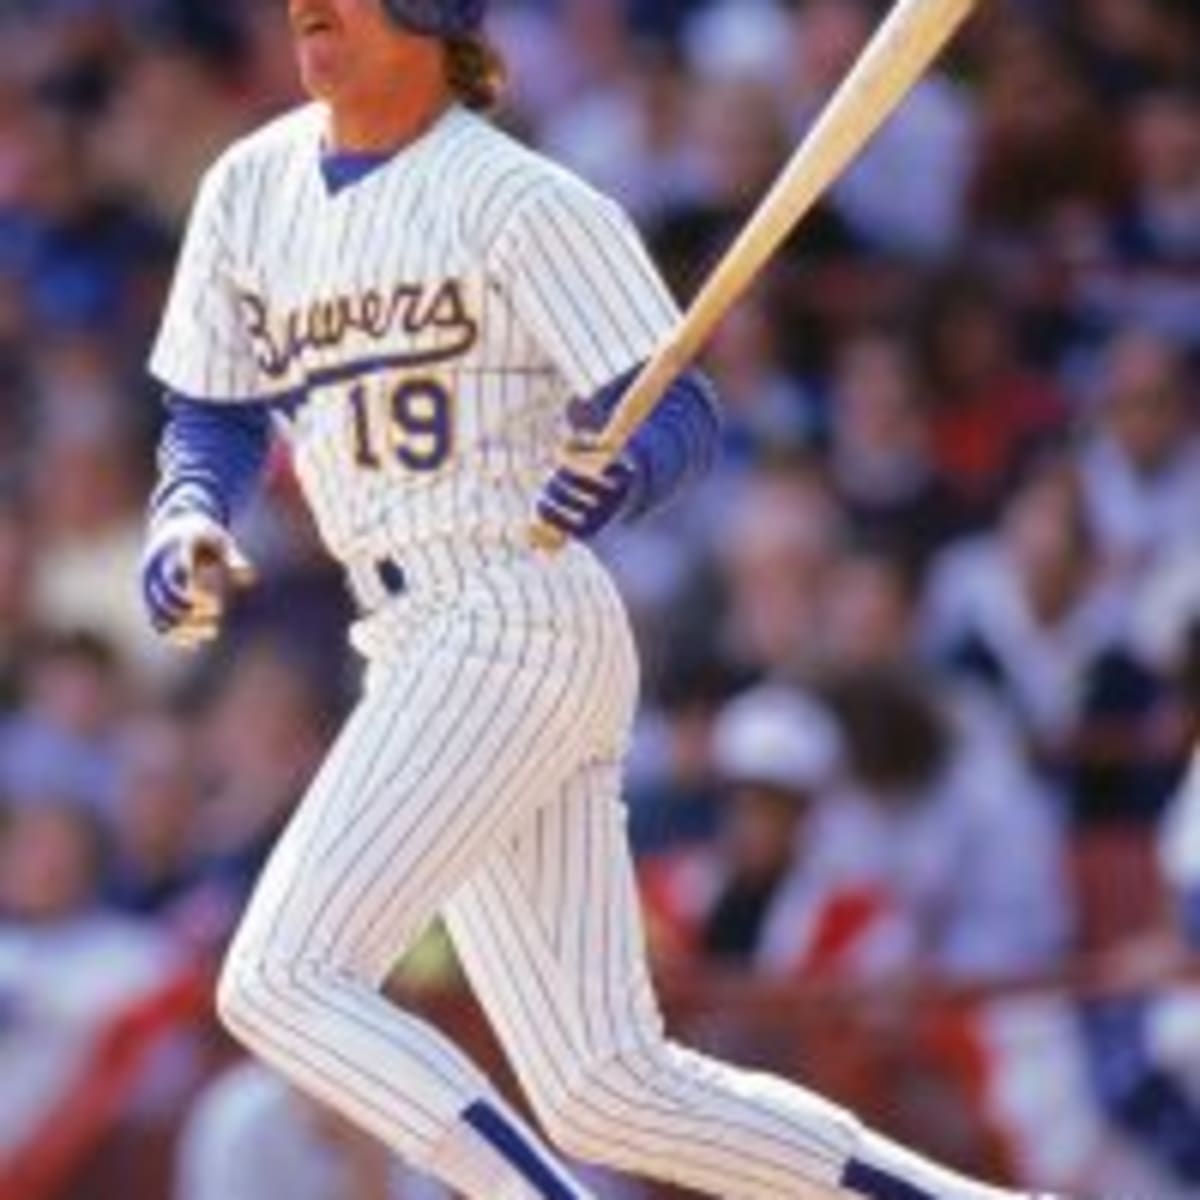 Robin Yount's Memorabilia Up For Auction, by The Brewer Nation, BrewerNation